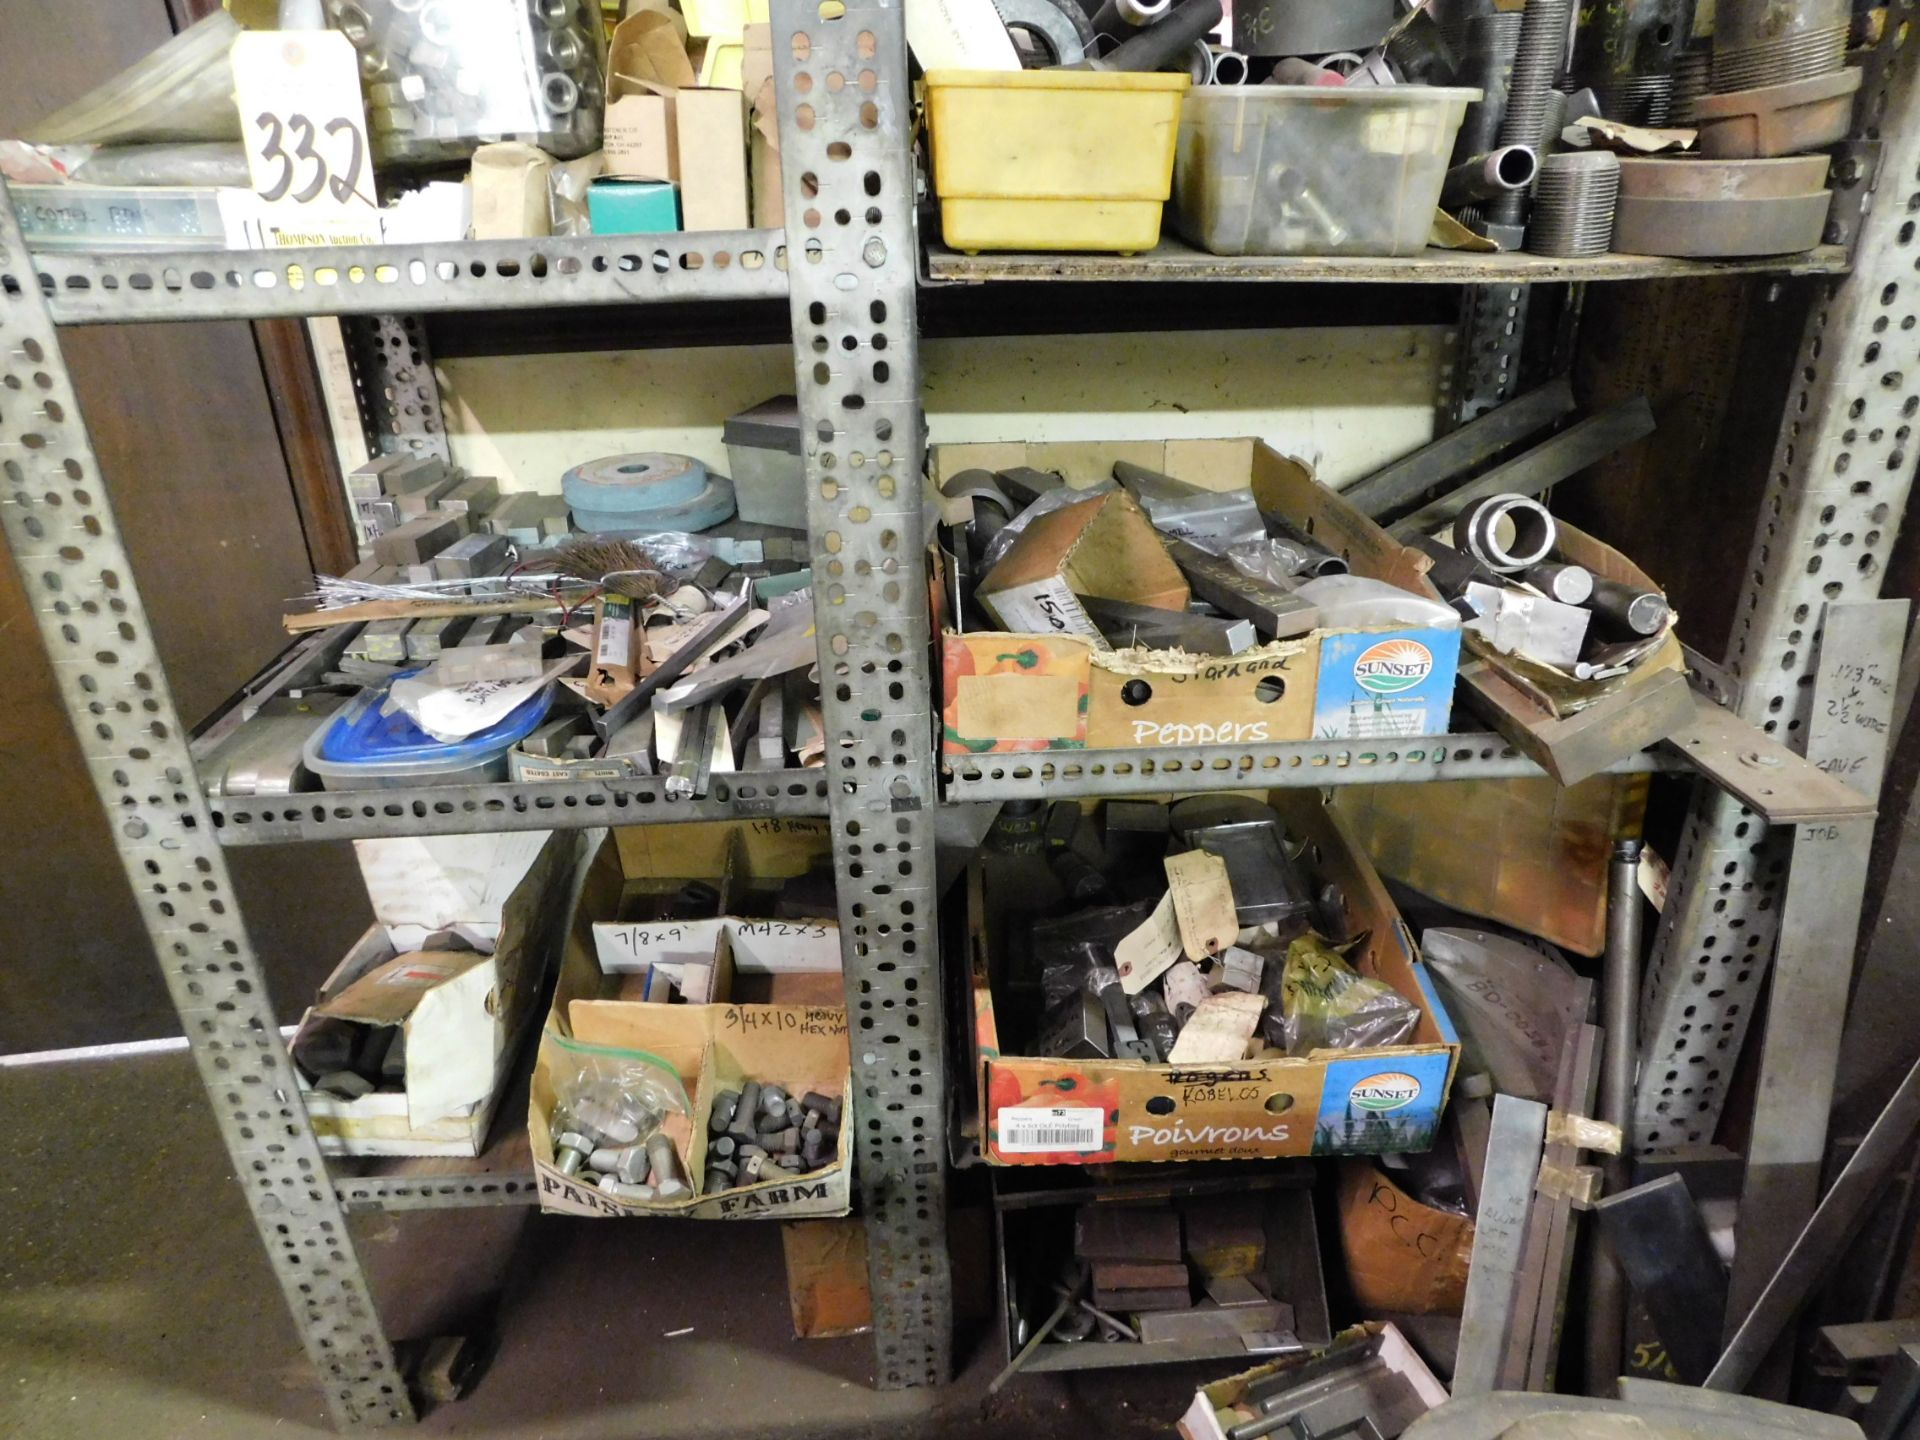 Shelving and Contents of Miscellaneous Hardware - Image 3 of 3